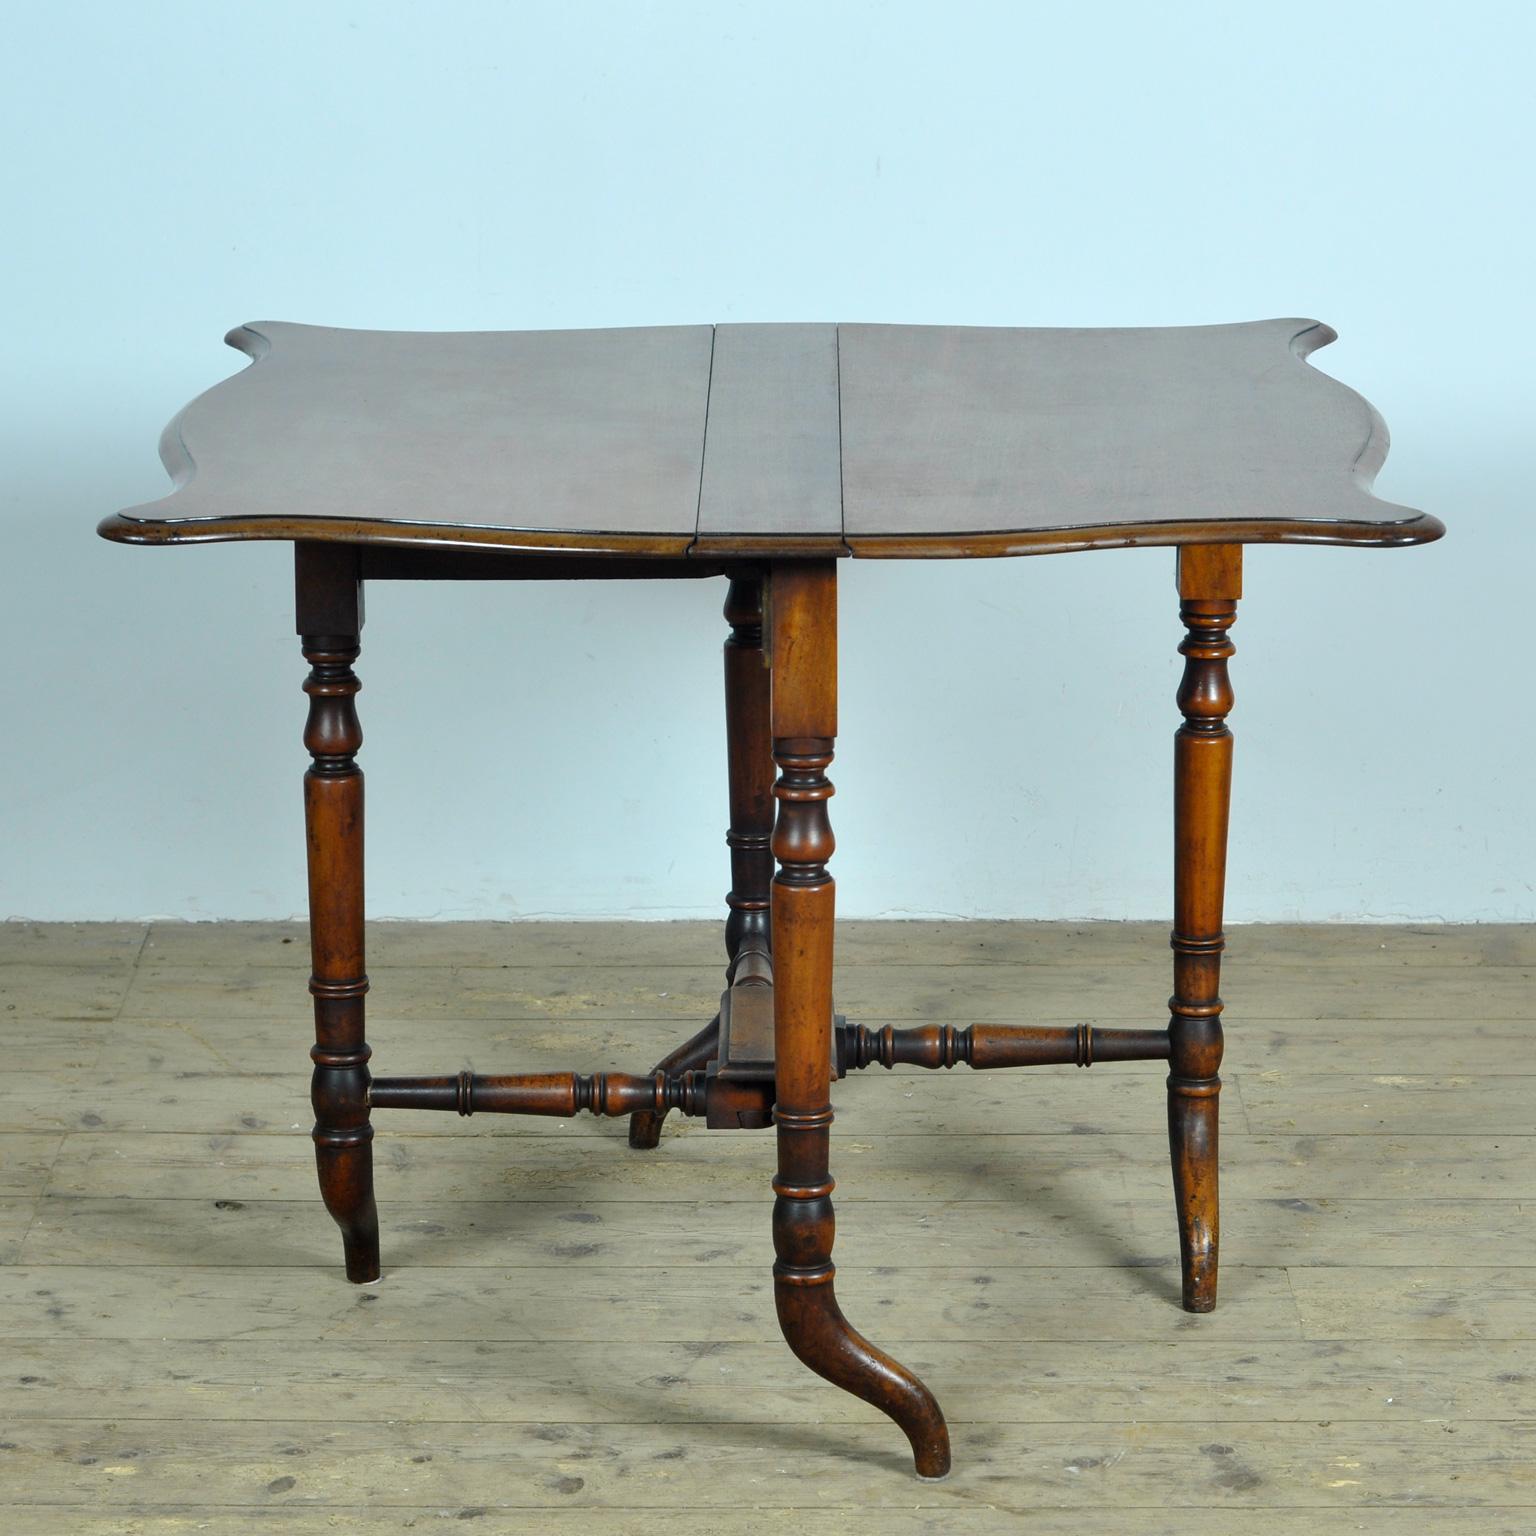 An English 19th century drop leaf table with folding top and beautiful turned legs. This English folding table, from the first half of the 19th century, has a square top with elegant round corners made of two folding leaves, sitting above a